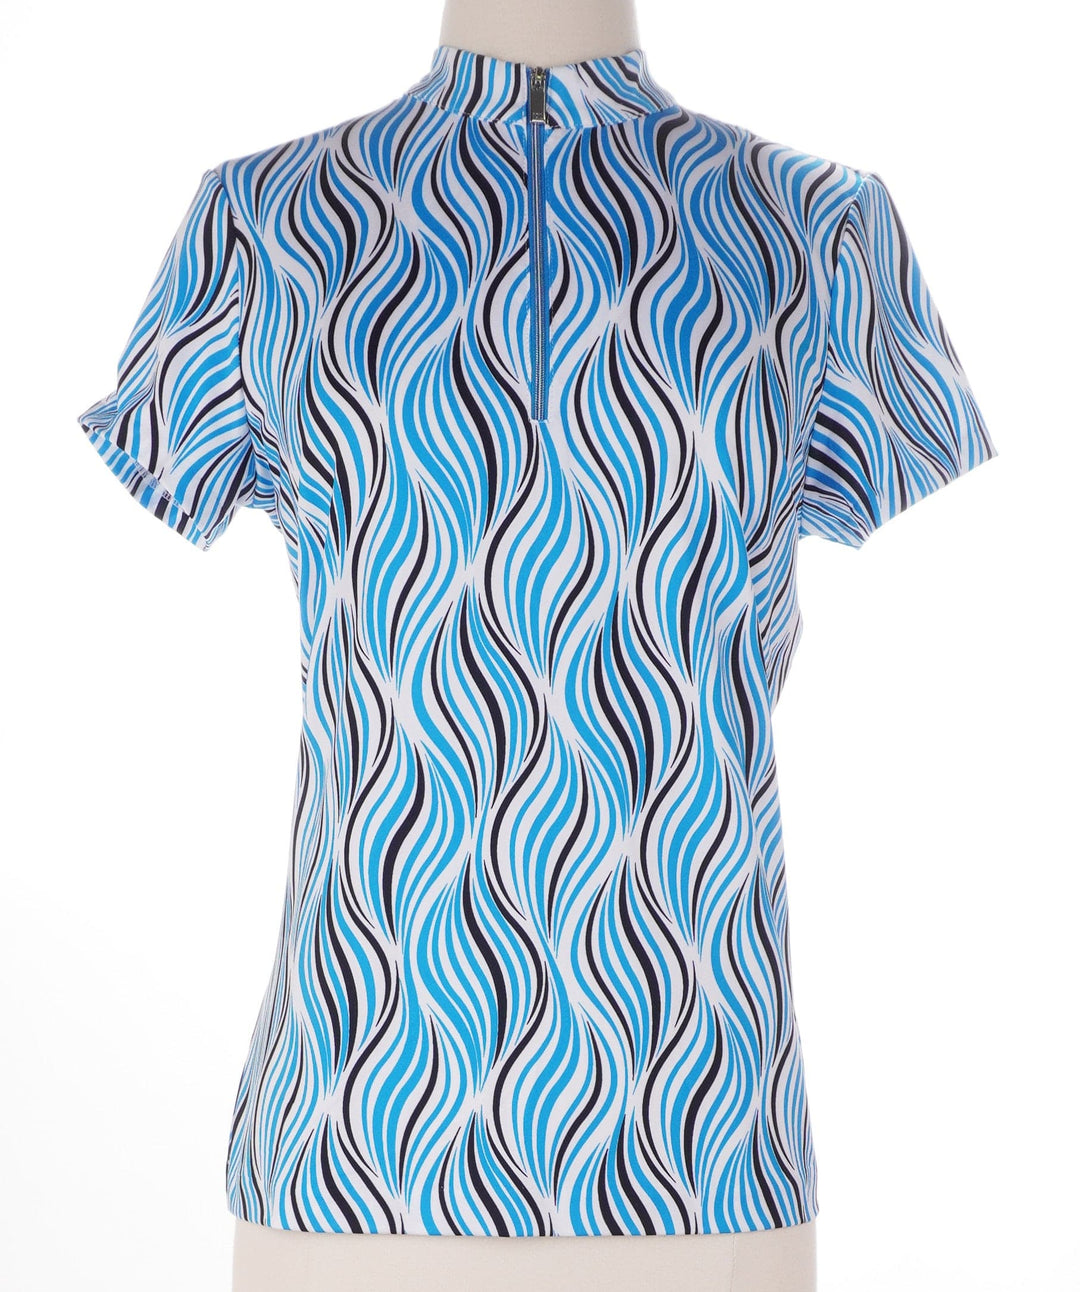 Tail Blue / Small Tail Michelle Short Sleeve Top - Geo Twist - Size Small